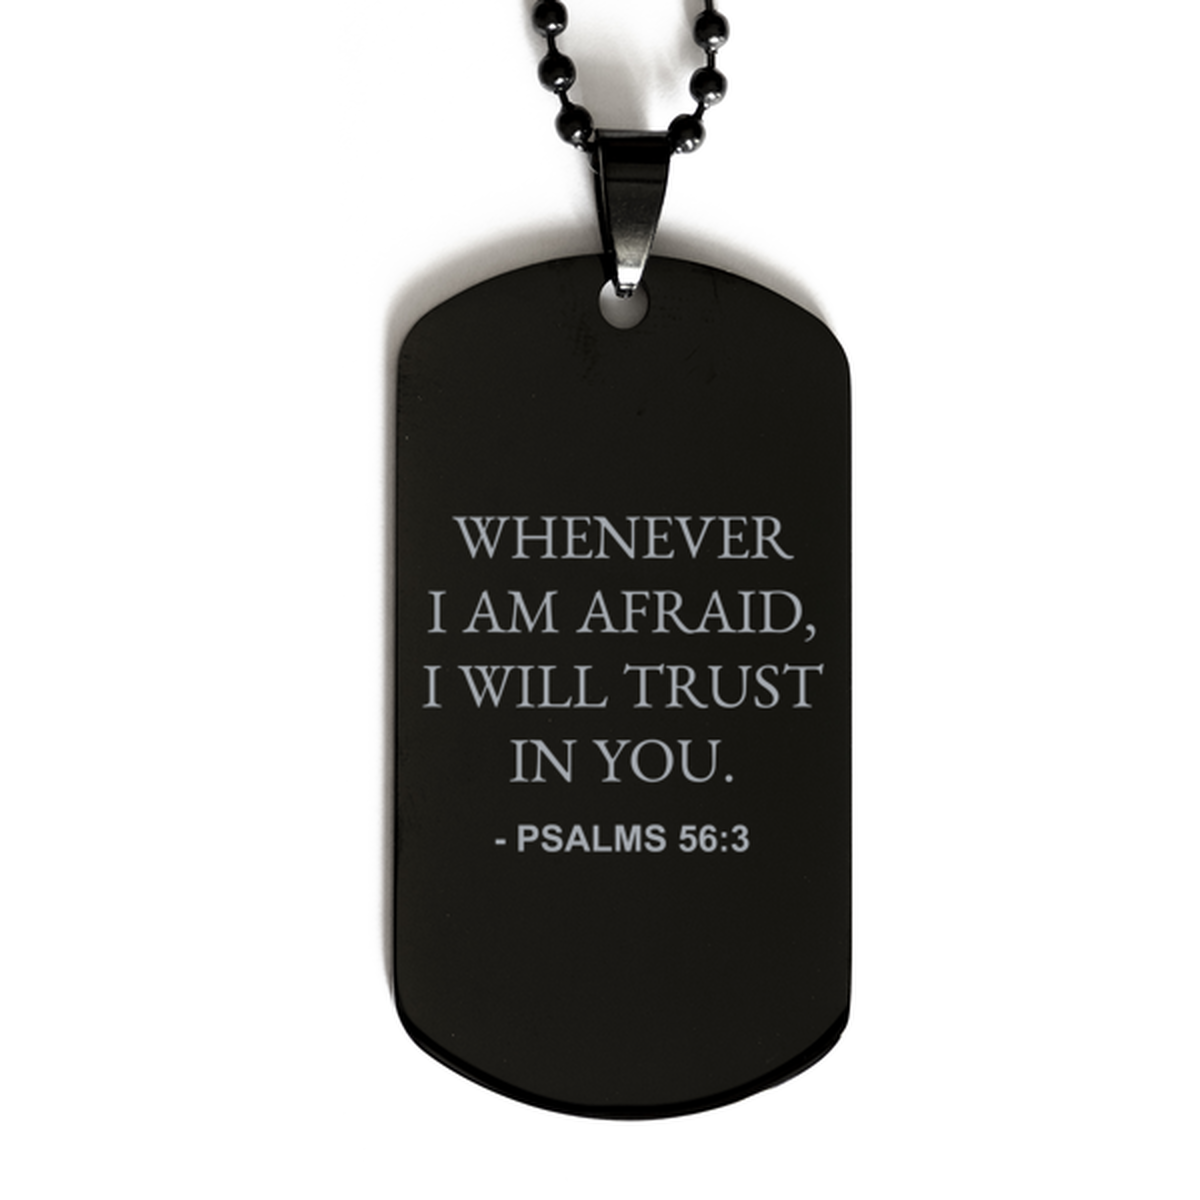 Bible Verse Black Dog Tag, Psalms 56:3 Whenever I Am Afraid, I Will Trust In, Christian Inspirational Necklace Gifts For Men Women